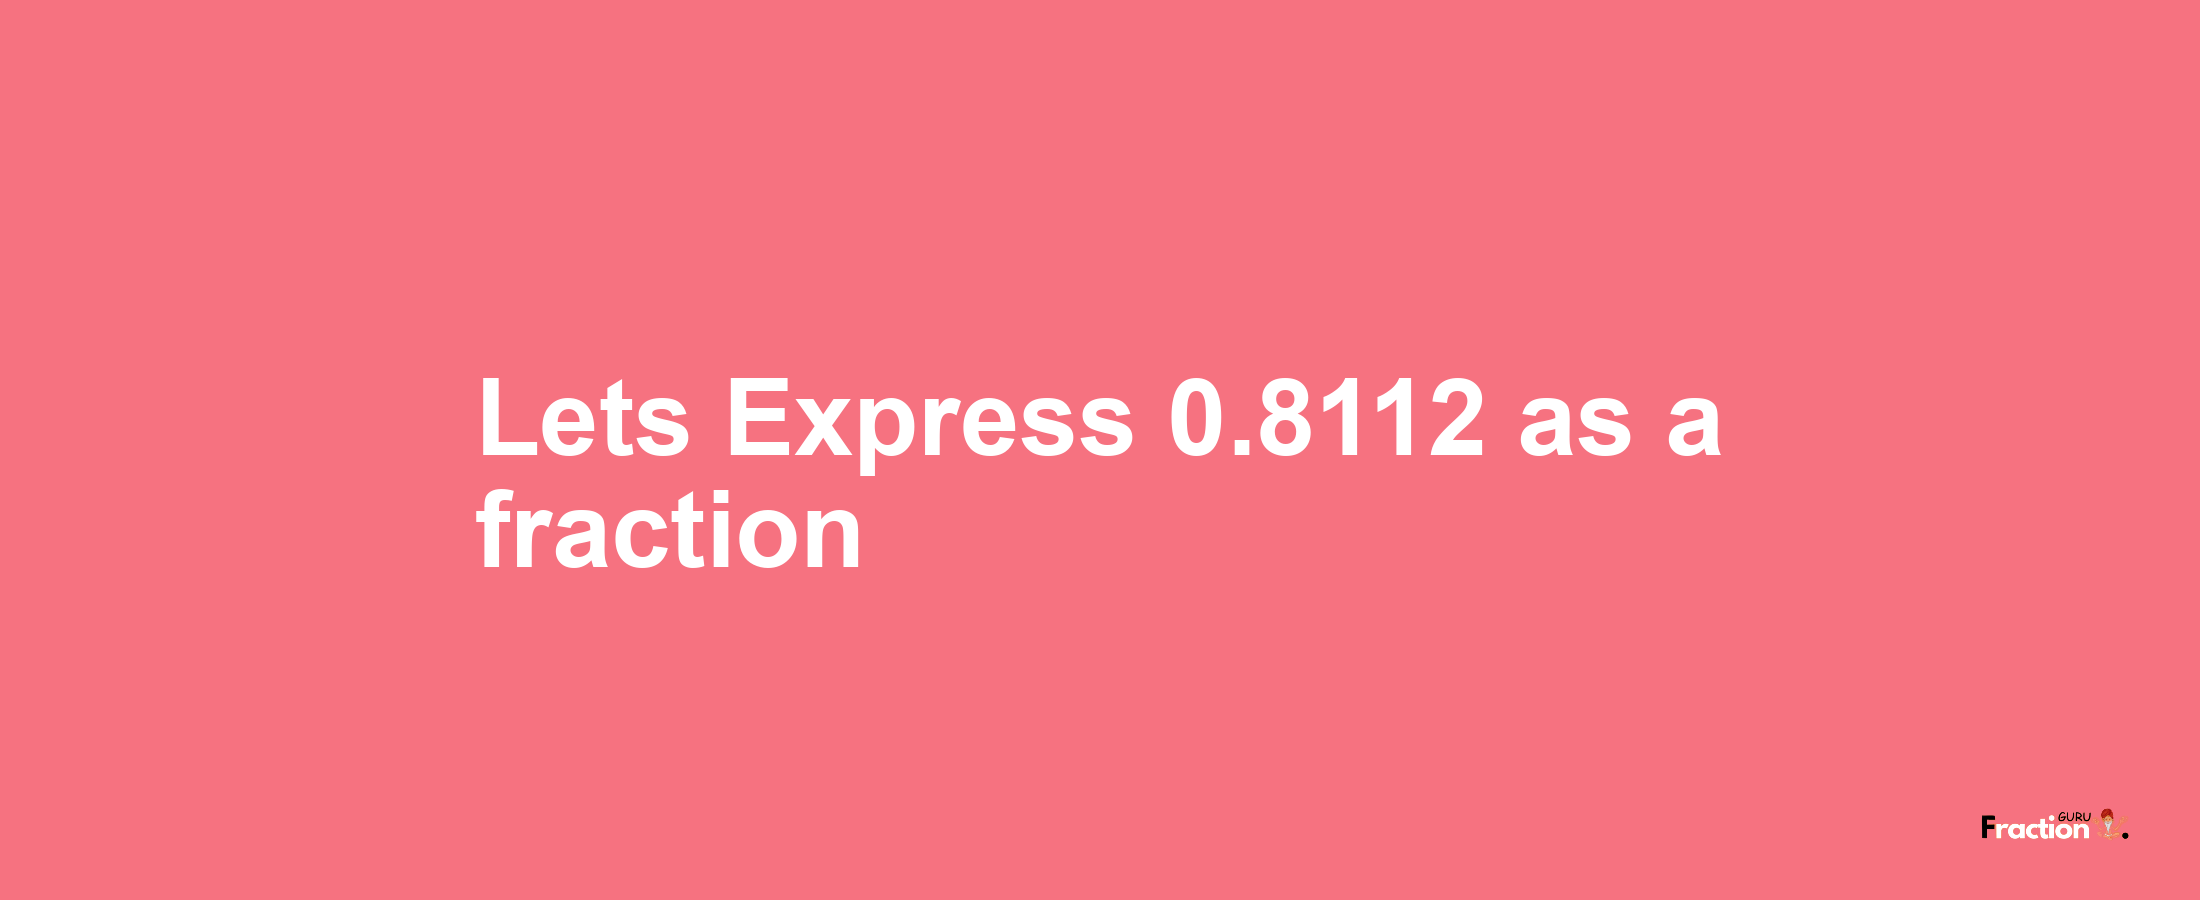 Lets Express 0.8112 as afraction